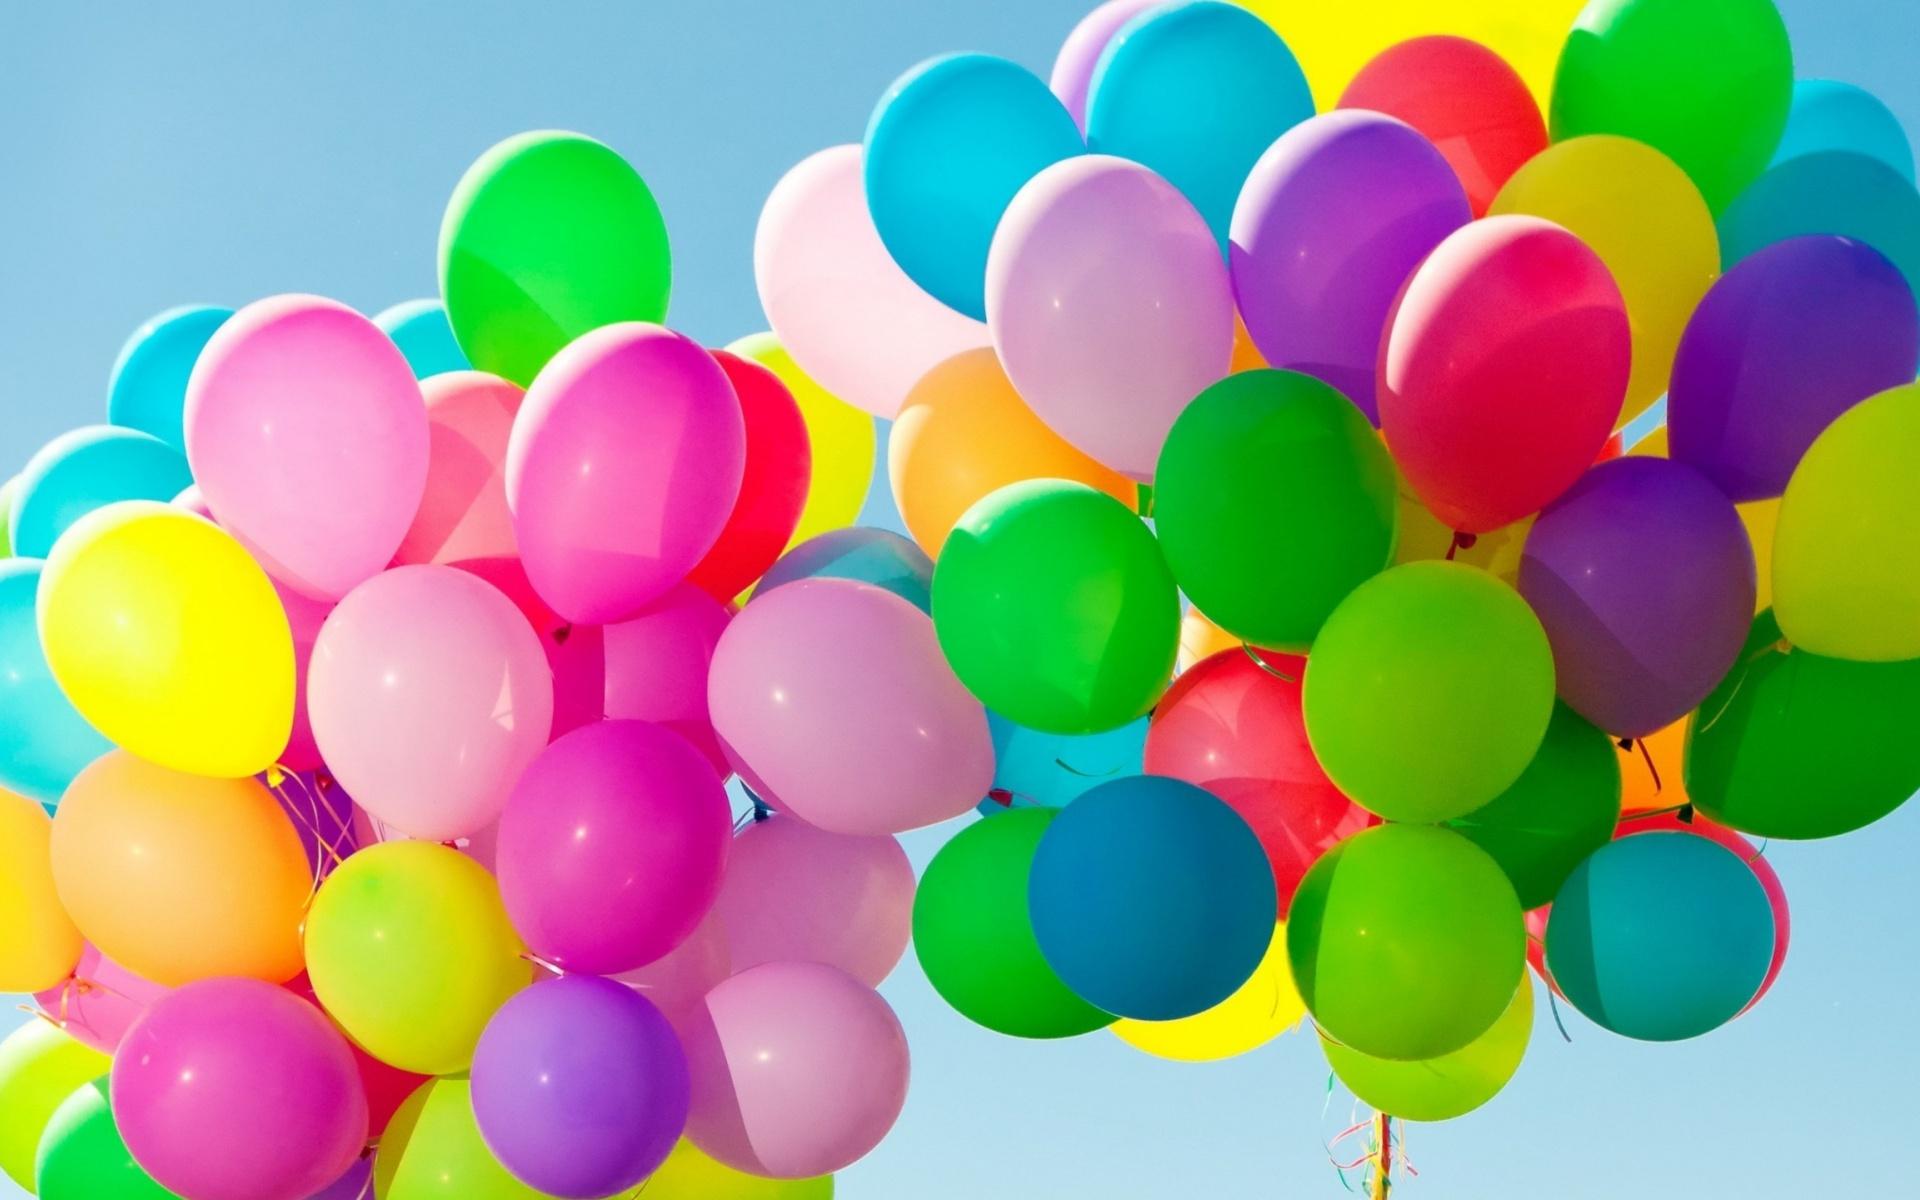 1920x1200 Colorful Balloons in the Sky desktop PC and Mac